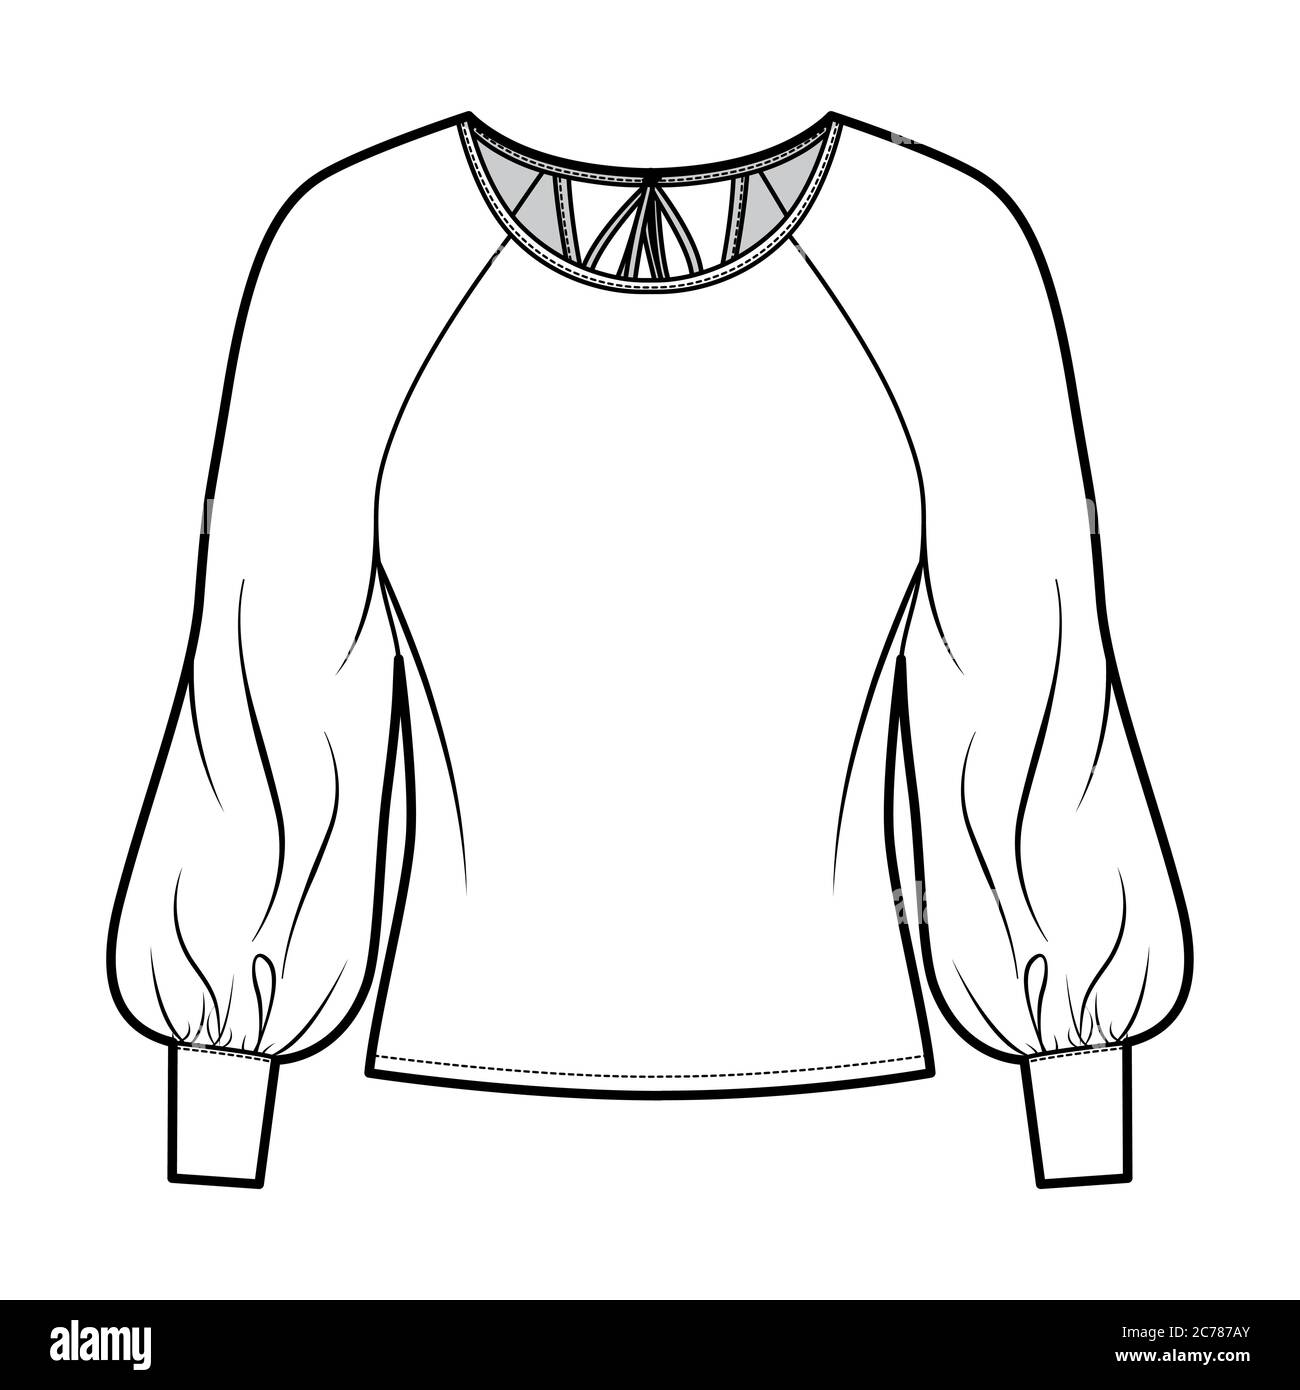 Blouse technical fashion illustration with wide round neck, exaggerated balloon raglan sleeves. sleeves, ties at back. Flat apparel shirt template front, white color. Women men unisex top CAD Stock Vector